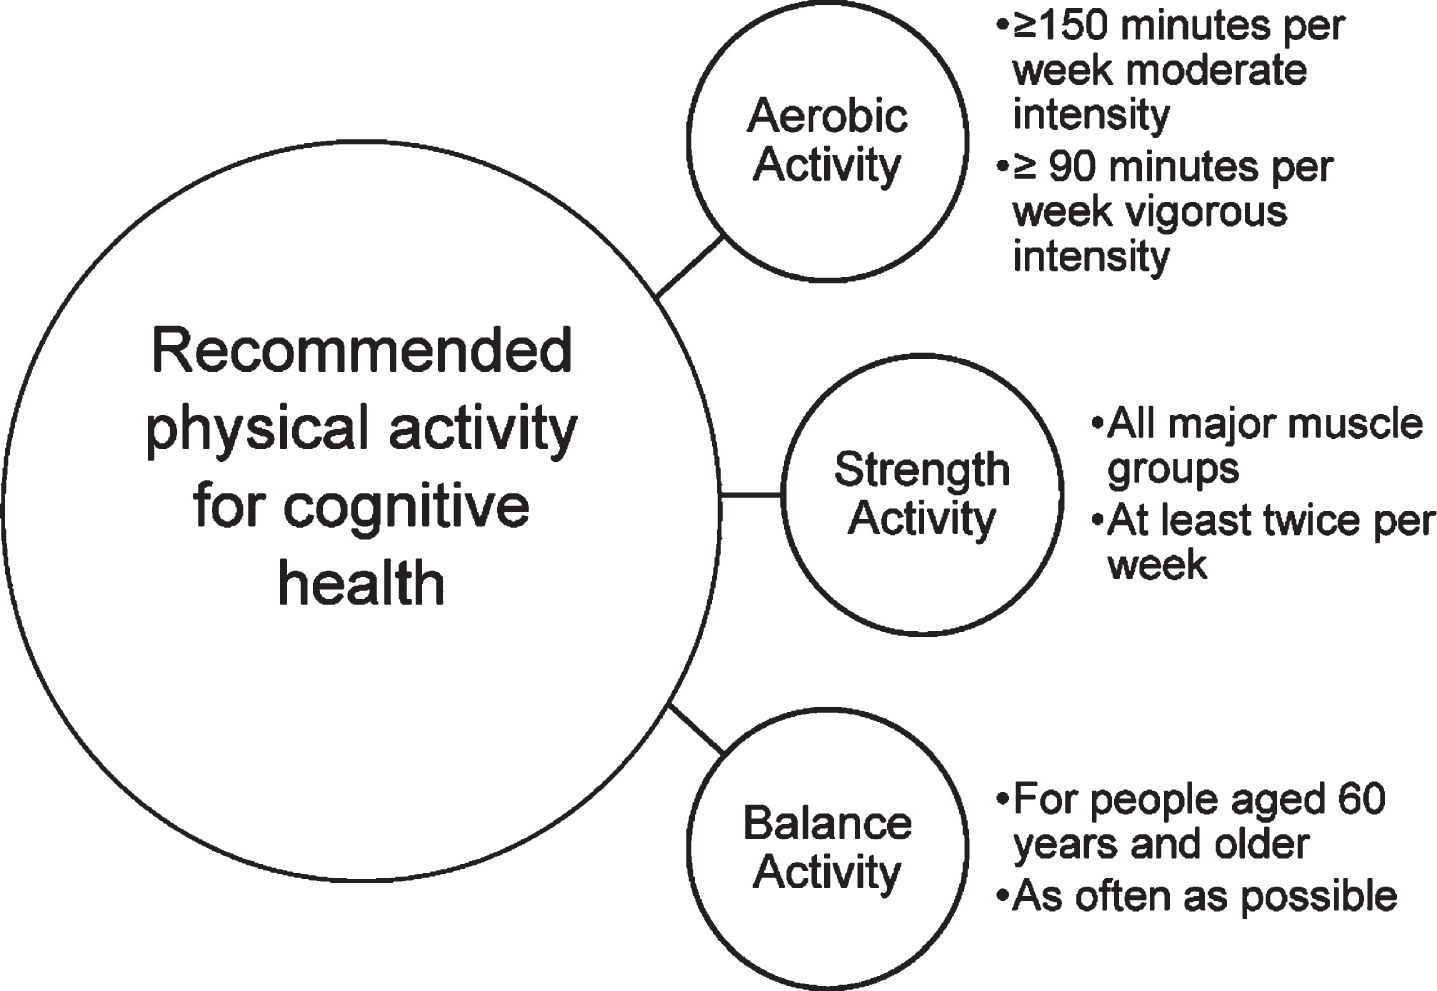 Summary physical activity recommendations for people with cognitive concerns, adapted from Australian general population guidelines [23], and from specific guidelines for older Australians living with mild cognitive impairment or subjective cognitive decline [24].